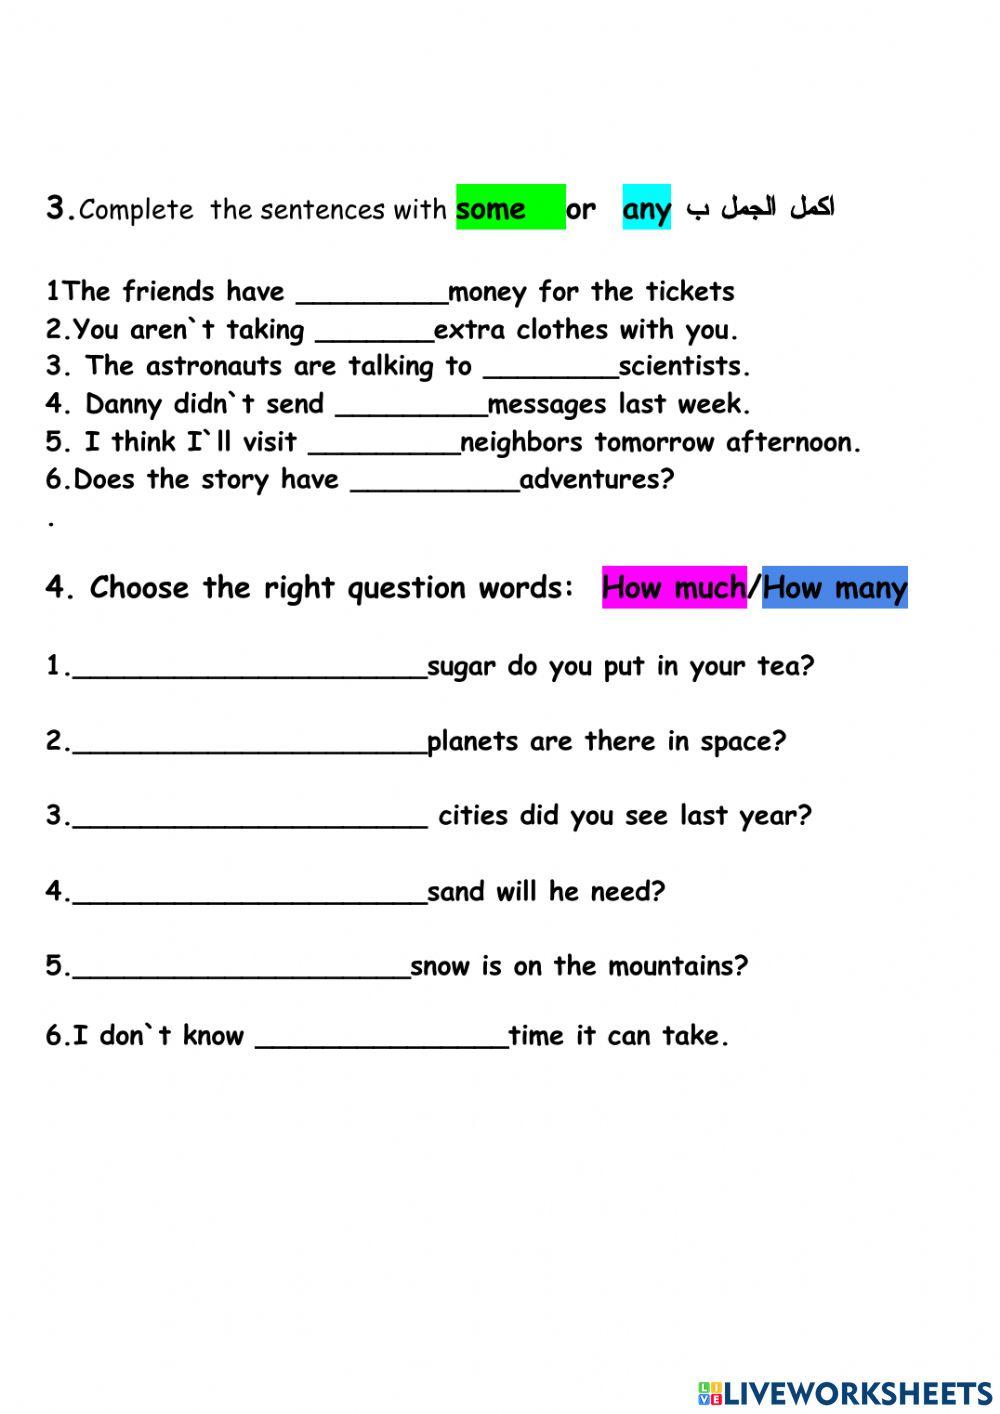 Count-Non count nouns  assignment